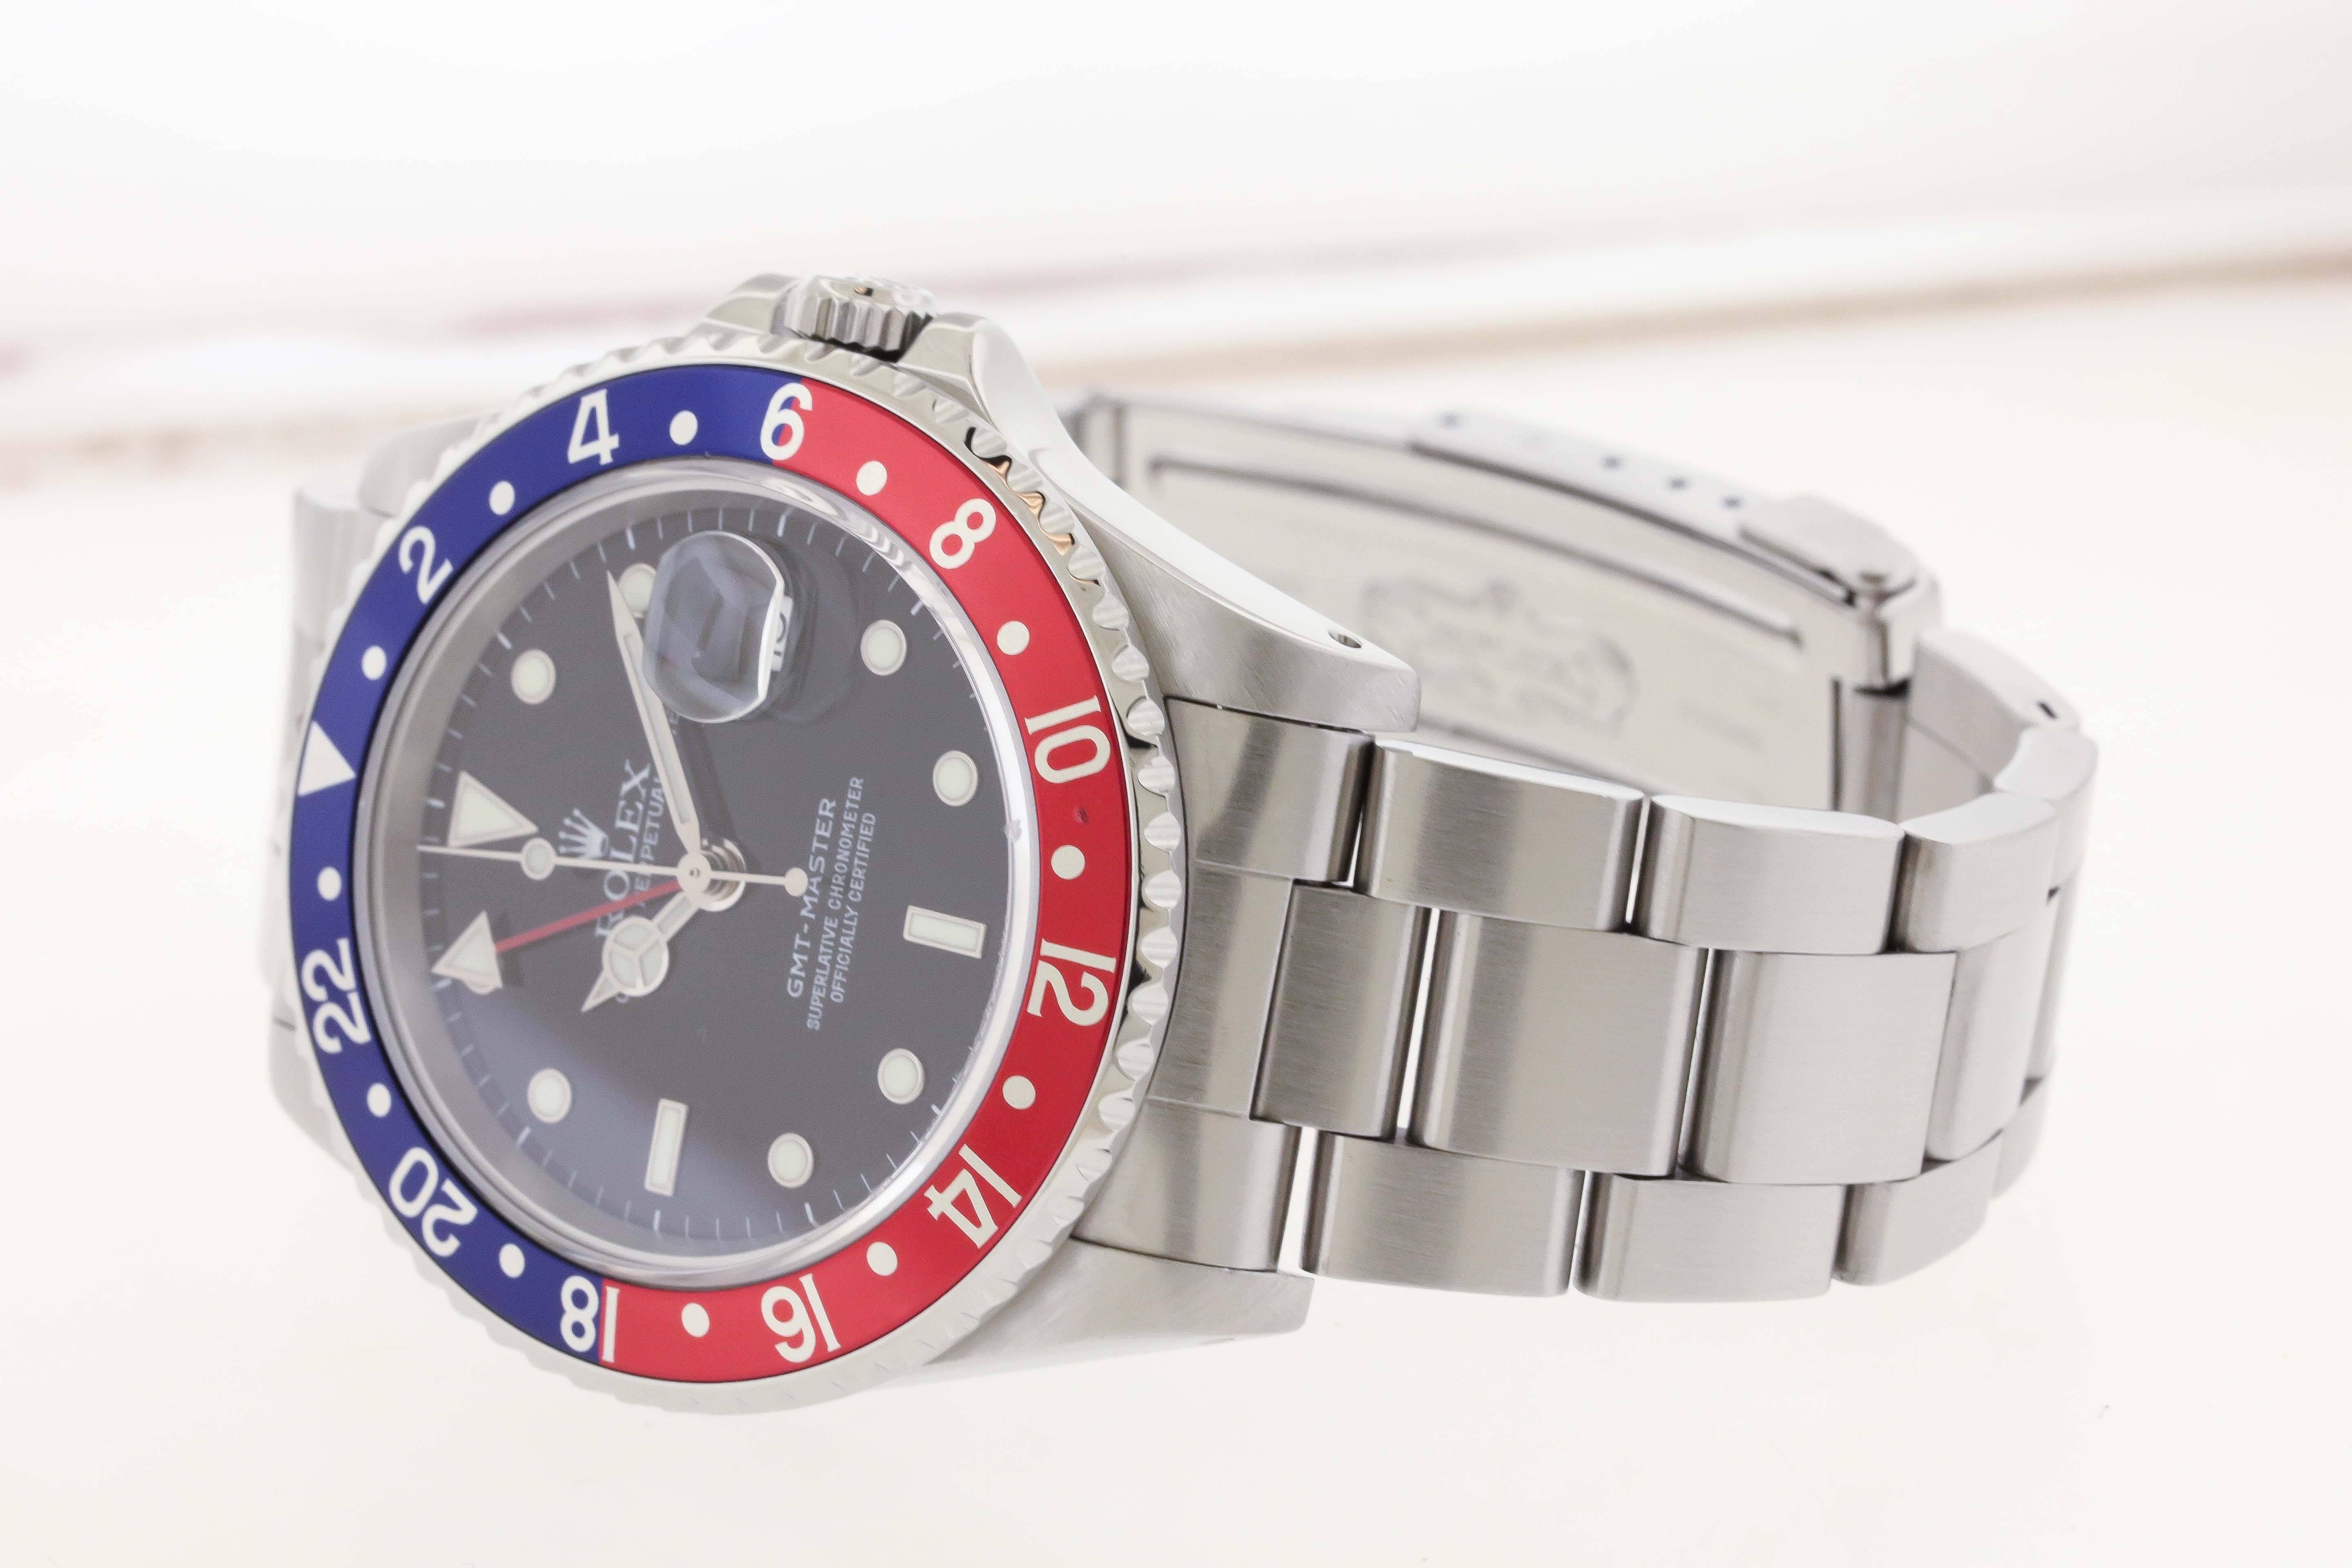 Stainless steel Rolex GMT-Master, Ref. 16700, so-called 'Pepsi